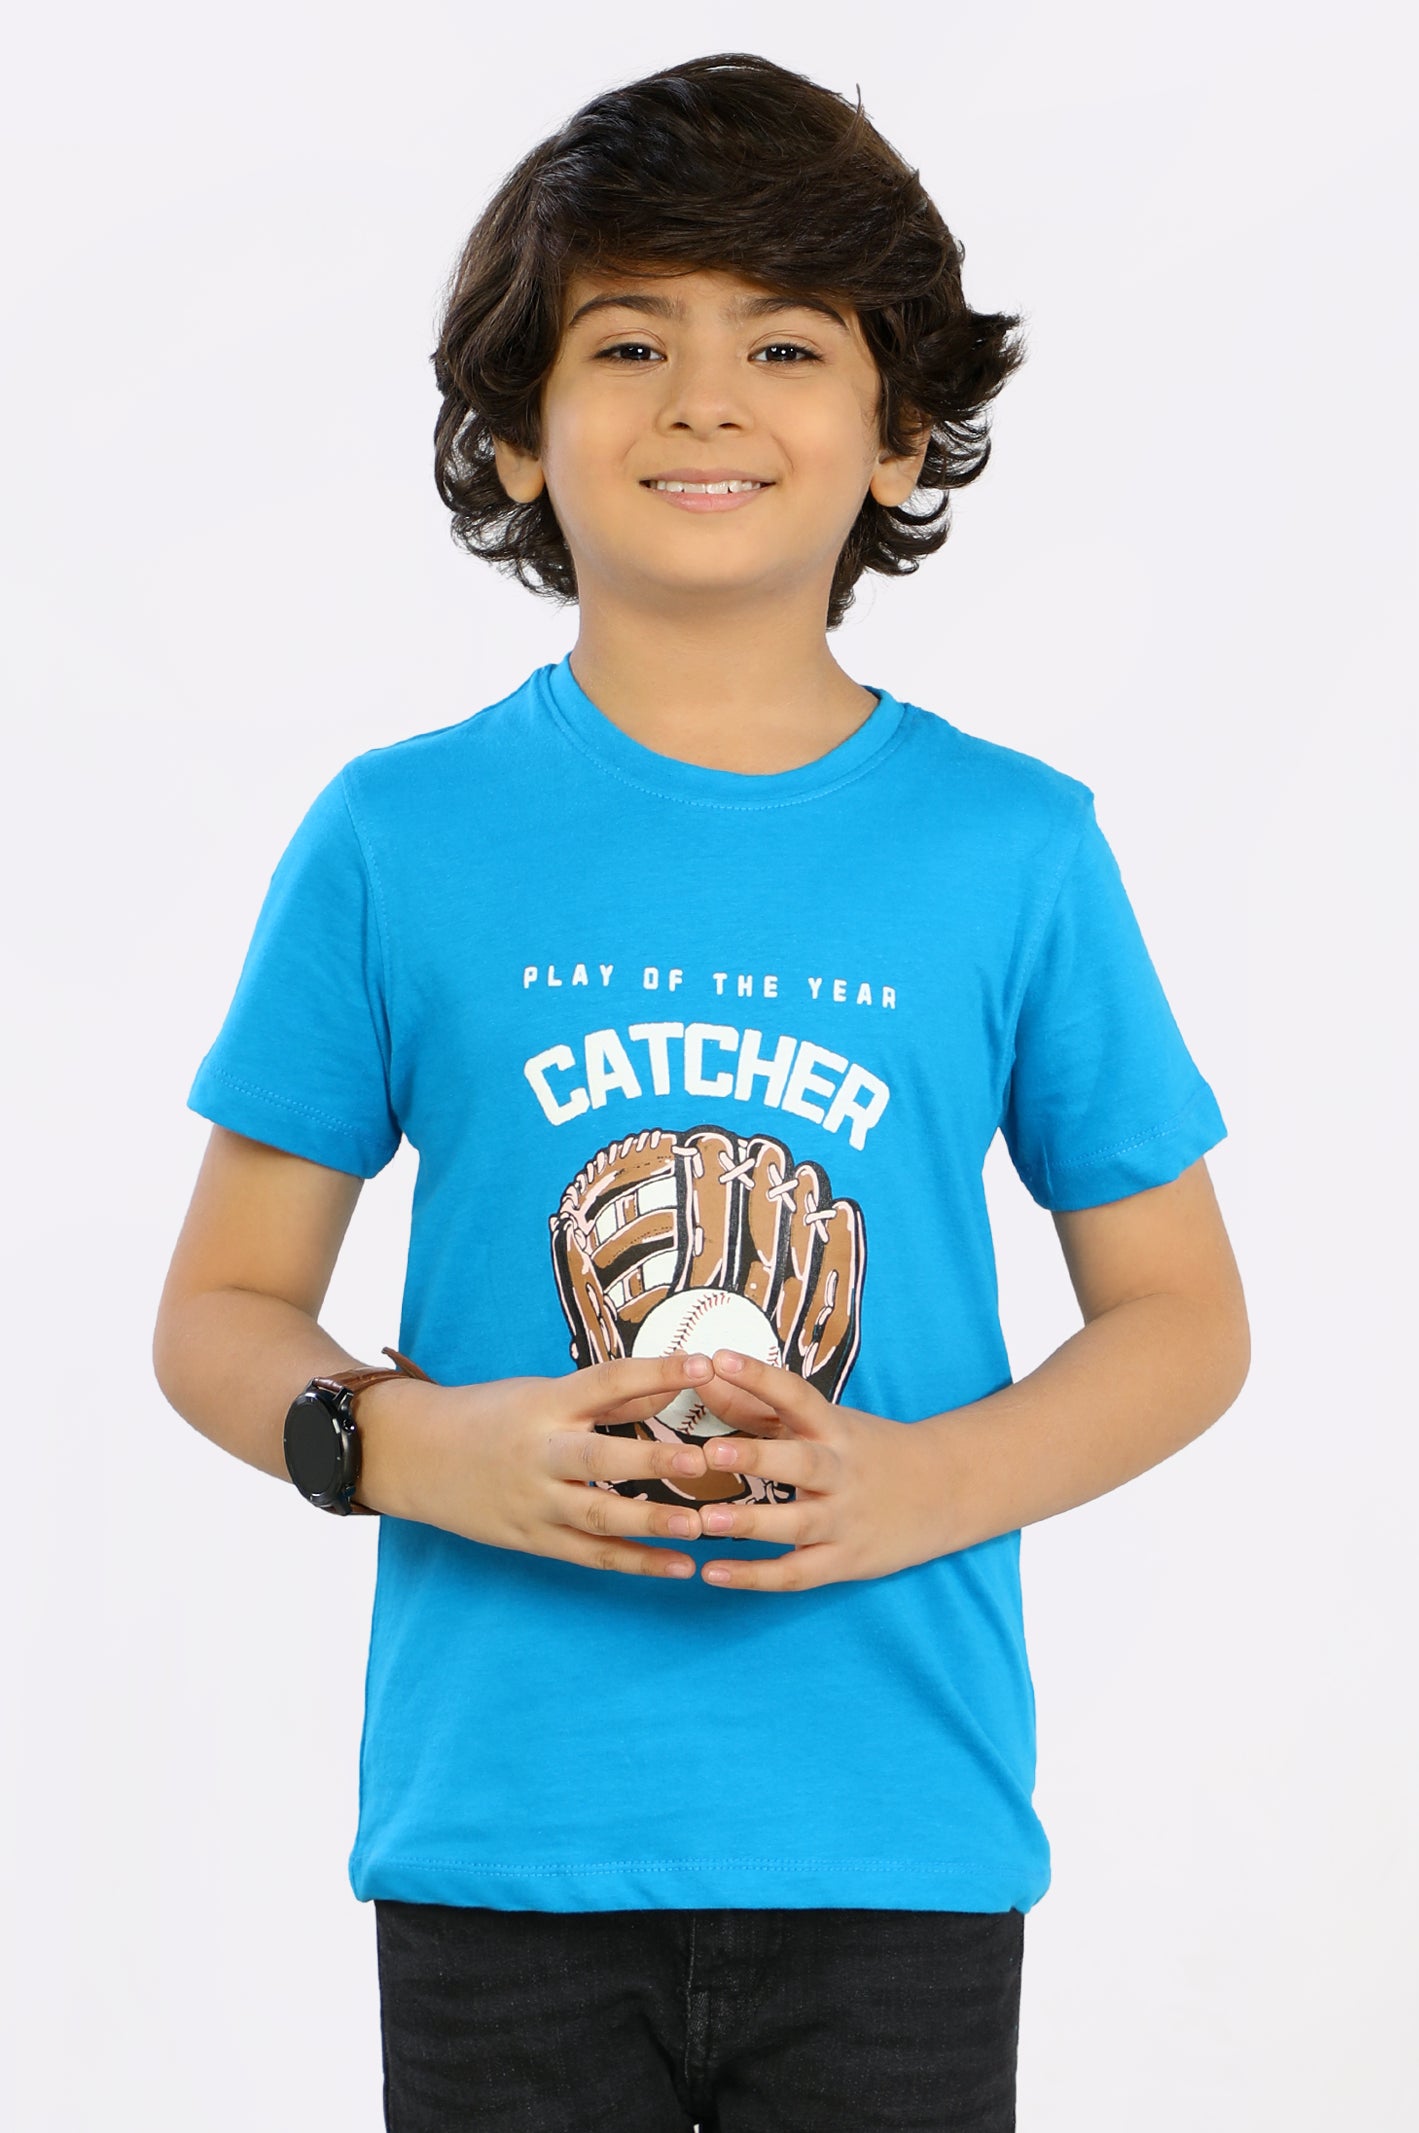 Baseball Catcher Print T-Shirt From Diners